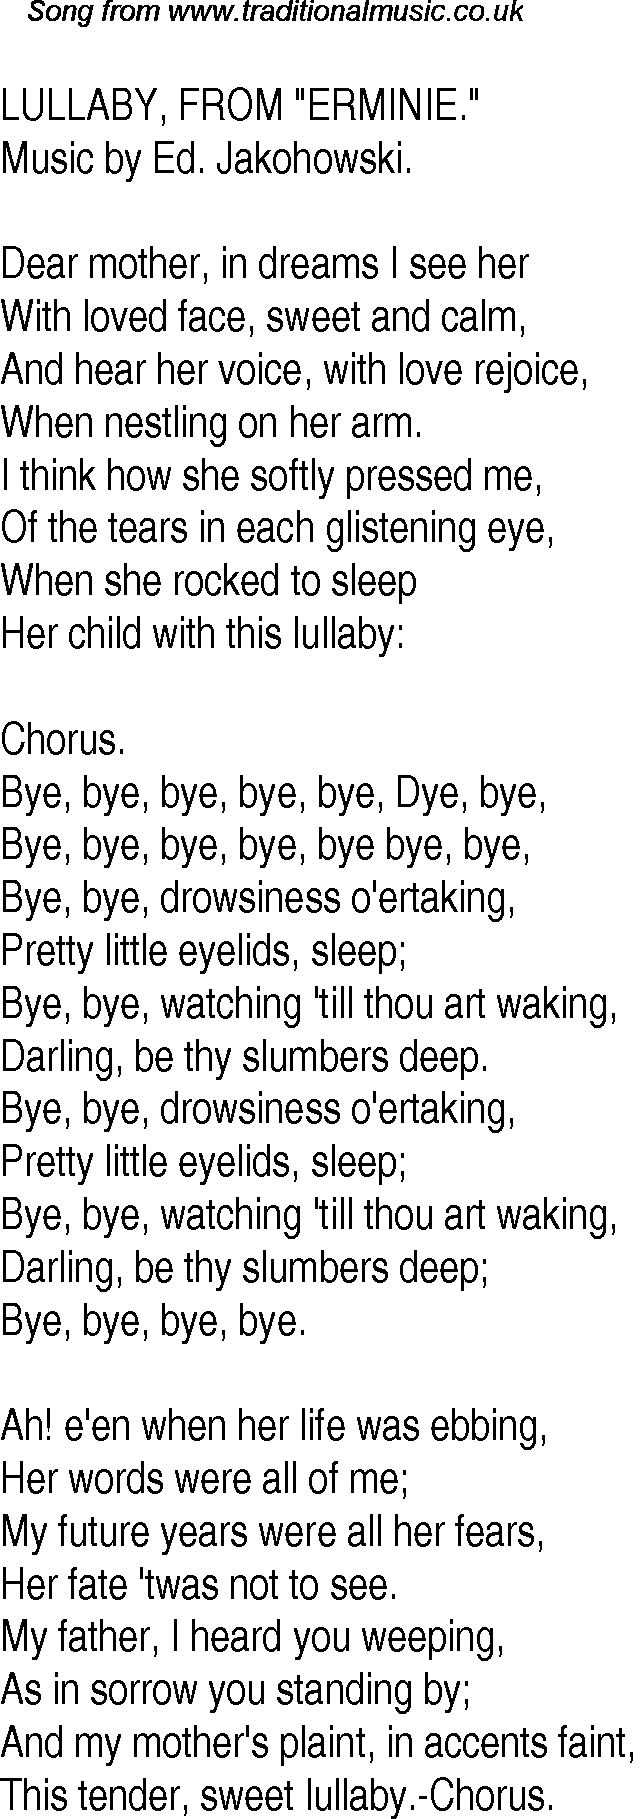 Old Time Song Lyrics for 19 Lullaby, From Erminie